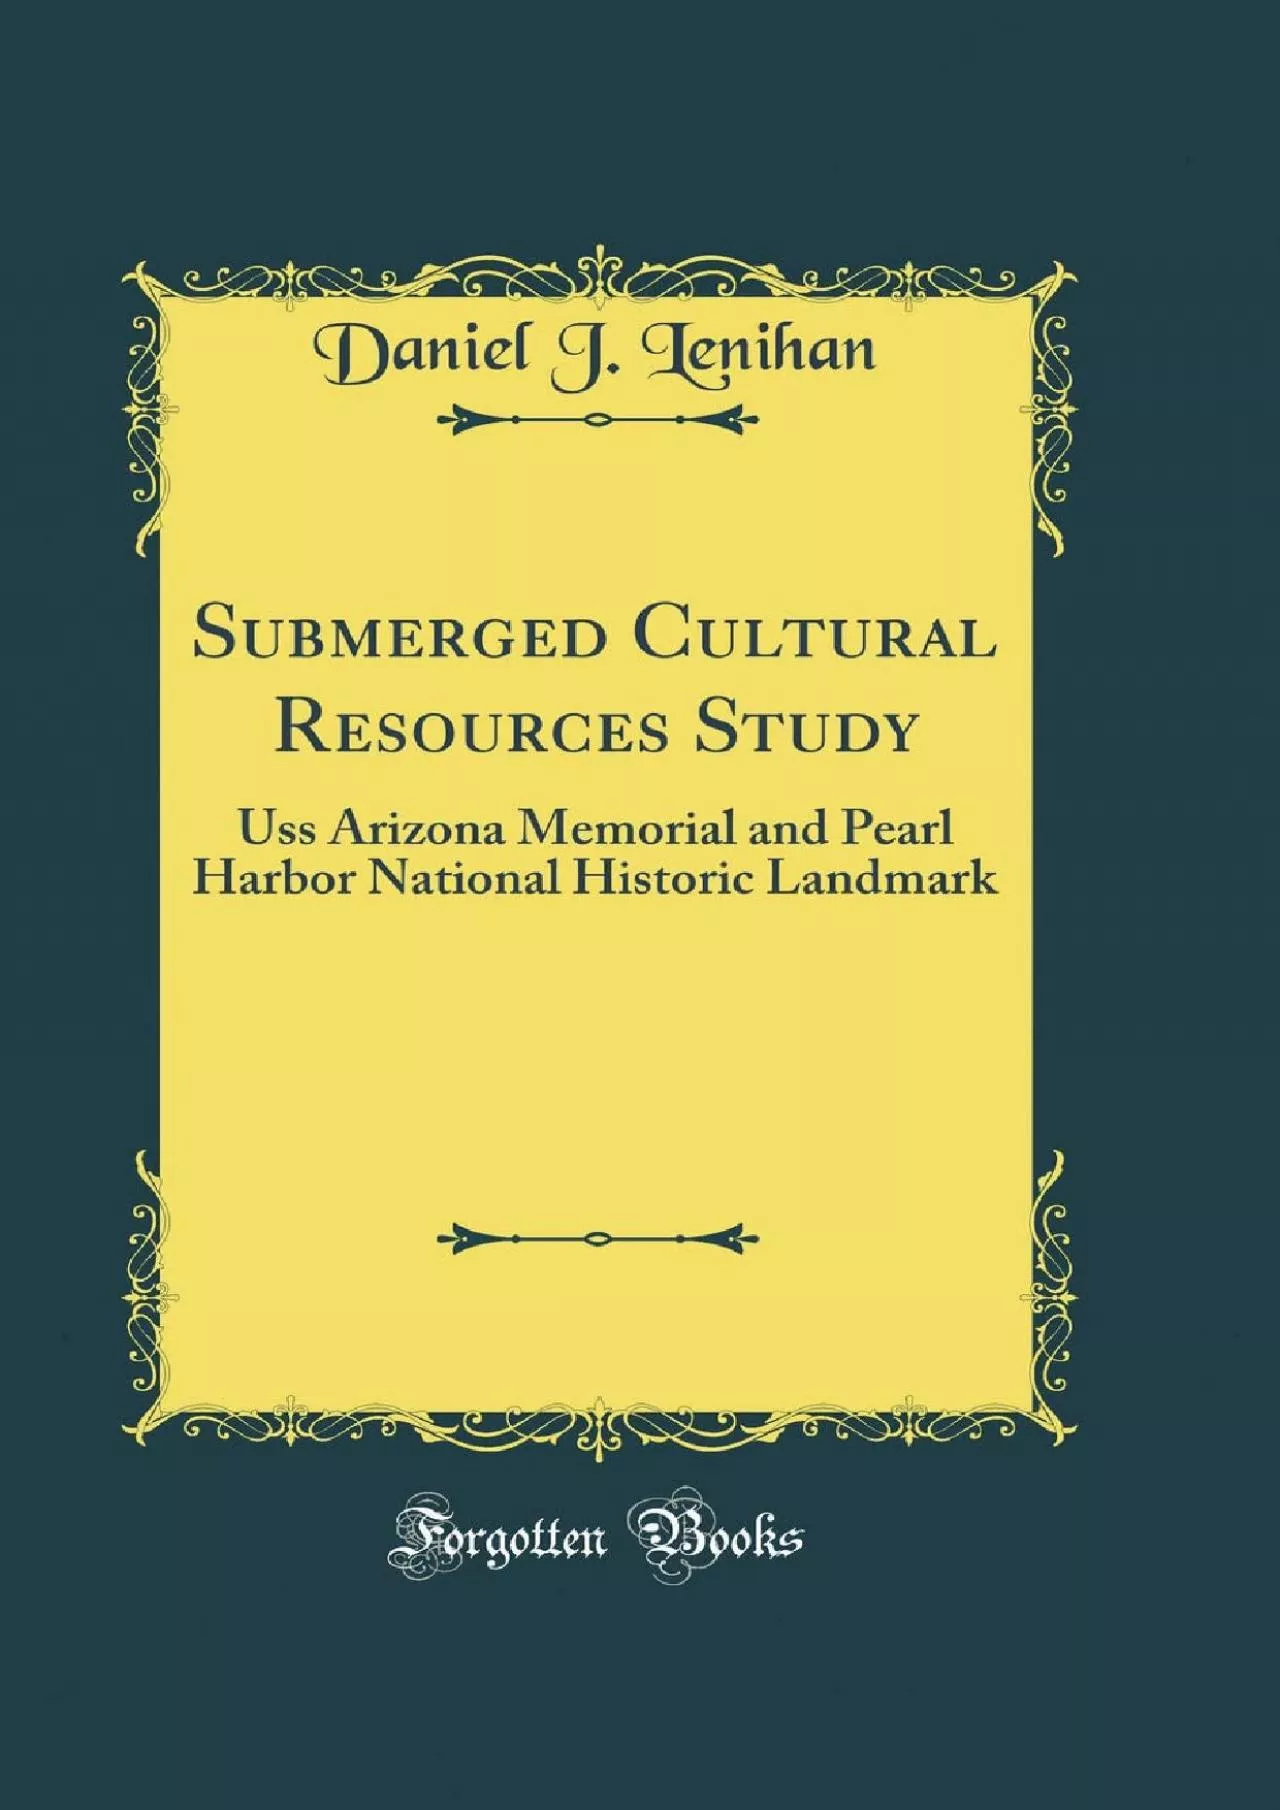 (BOOK)-Submerged Cultural Resources Study: Uss Arizona Memorial and Pearl Harbor National